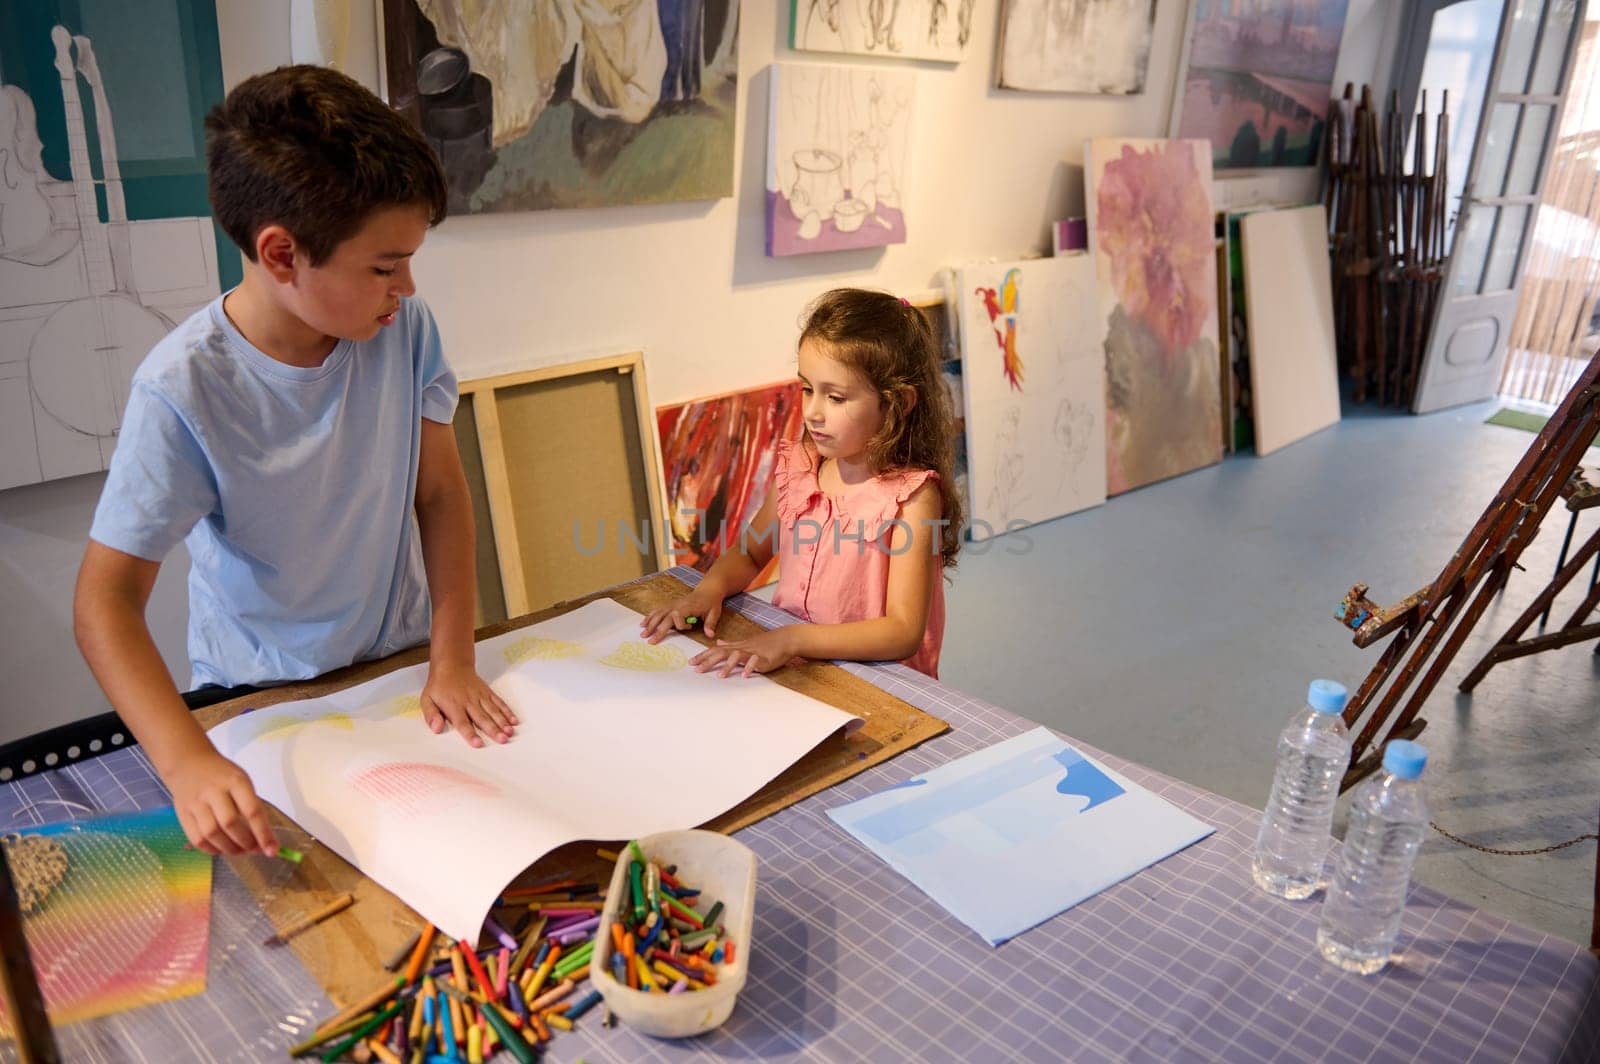 Adorable diverse children, a teenage boy and preschool girl drawing on white paper sheet during art class. People. Kids and hobbies.